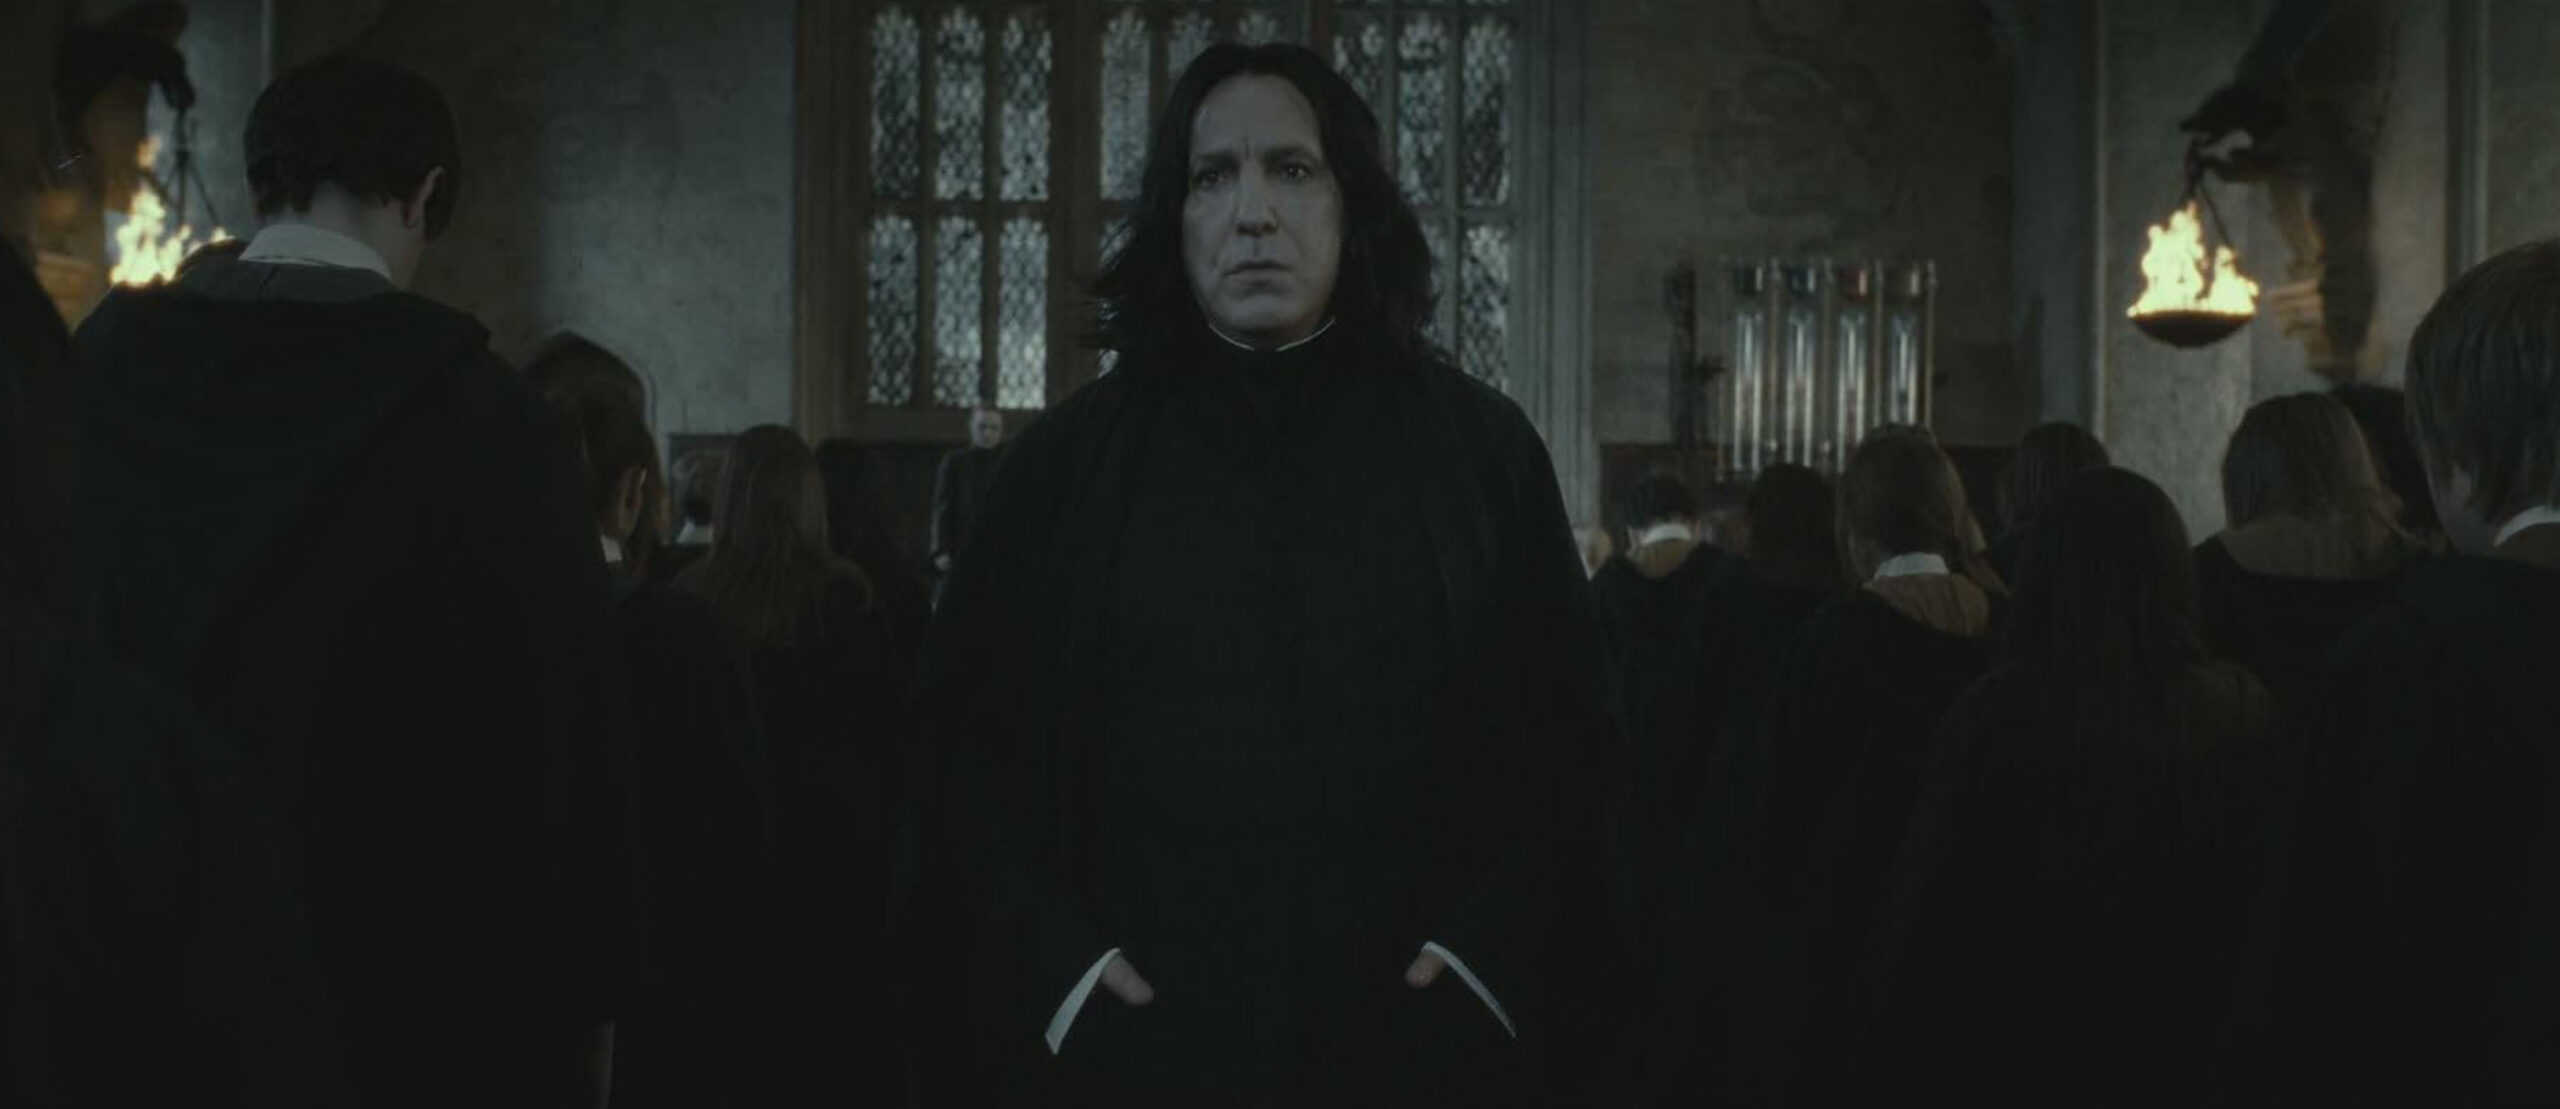 <ul> <li><strong>Who said it:</strong> Severus Snape</li> <li><strong>Played by:</strong> Alan Rickman</li> <li><strong>Movie:</strong> Harry Potter and the Deathly Hallows: Part 2 (2011)</li> </ul> <p>This quote by Snape is one of the defining moments in the film and for his character. After Dumbledore questions whether Snape has started to care for Harry, Snape casts the Patronus spell, and Dumbledore is baffled that the deer conjured by the spell is the same as Lily's, Harry's mother. Dumbledore exclaims, "Lily! After all this time?" Snape's response of "Always" showed his never-ending love for her, even years after her death.</p>